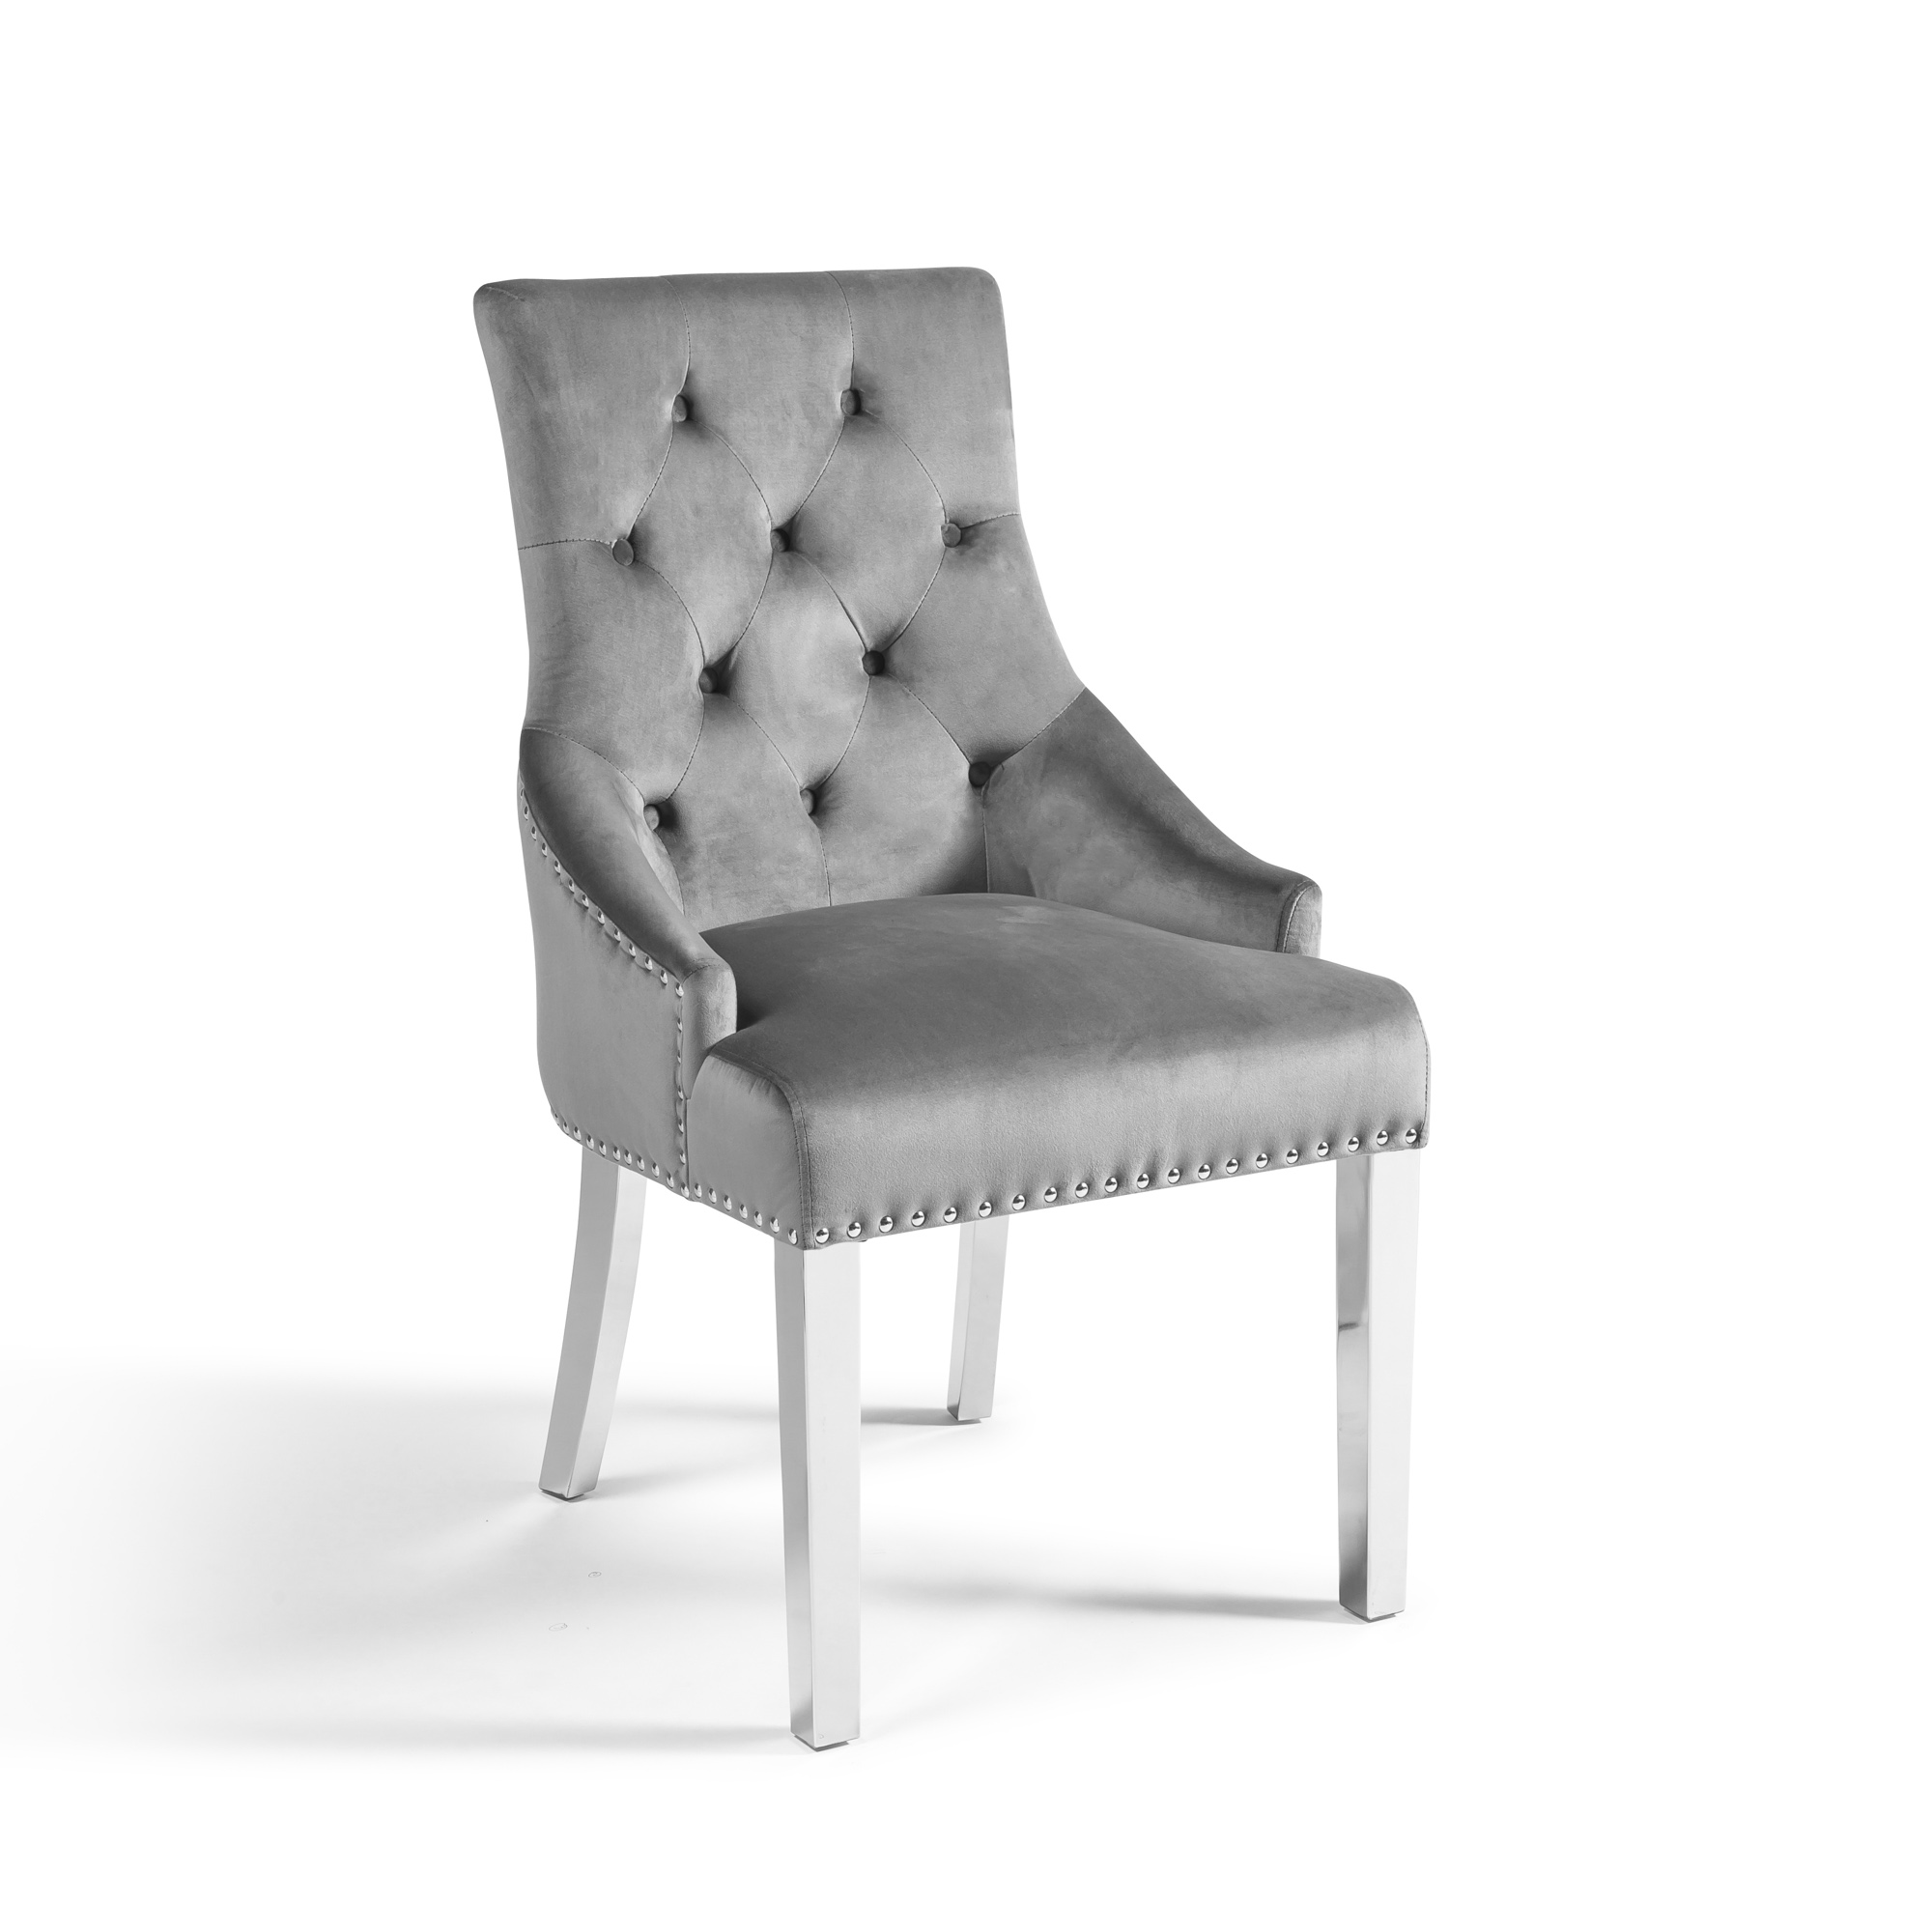 Chelsea Scoop Grey Velvet Dining Chair, Gray Upholstered Dining Chairs With Black Legs